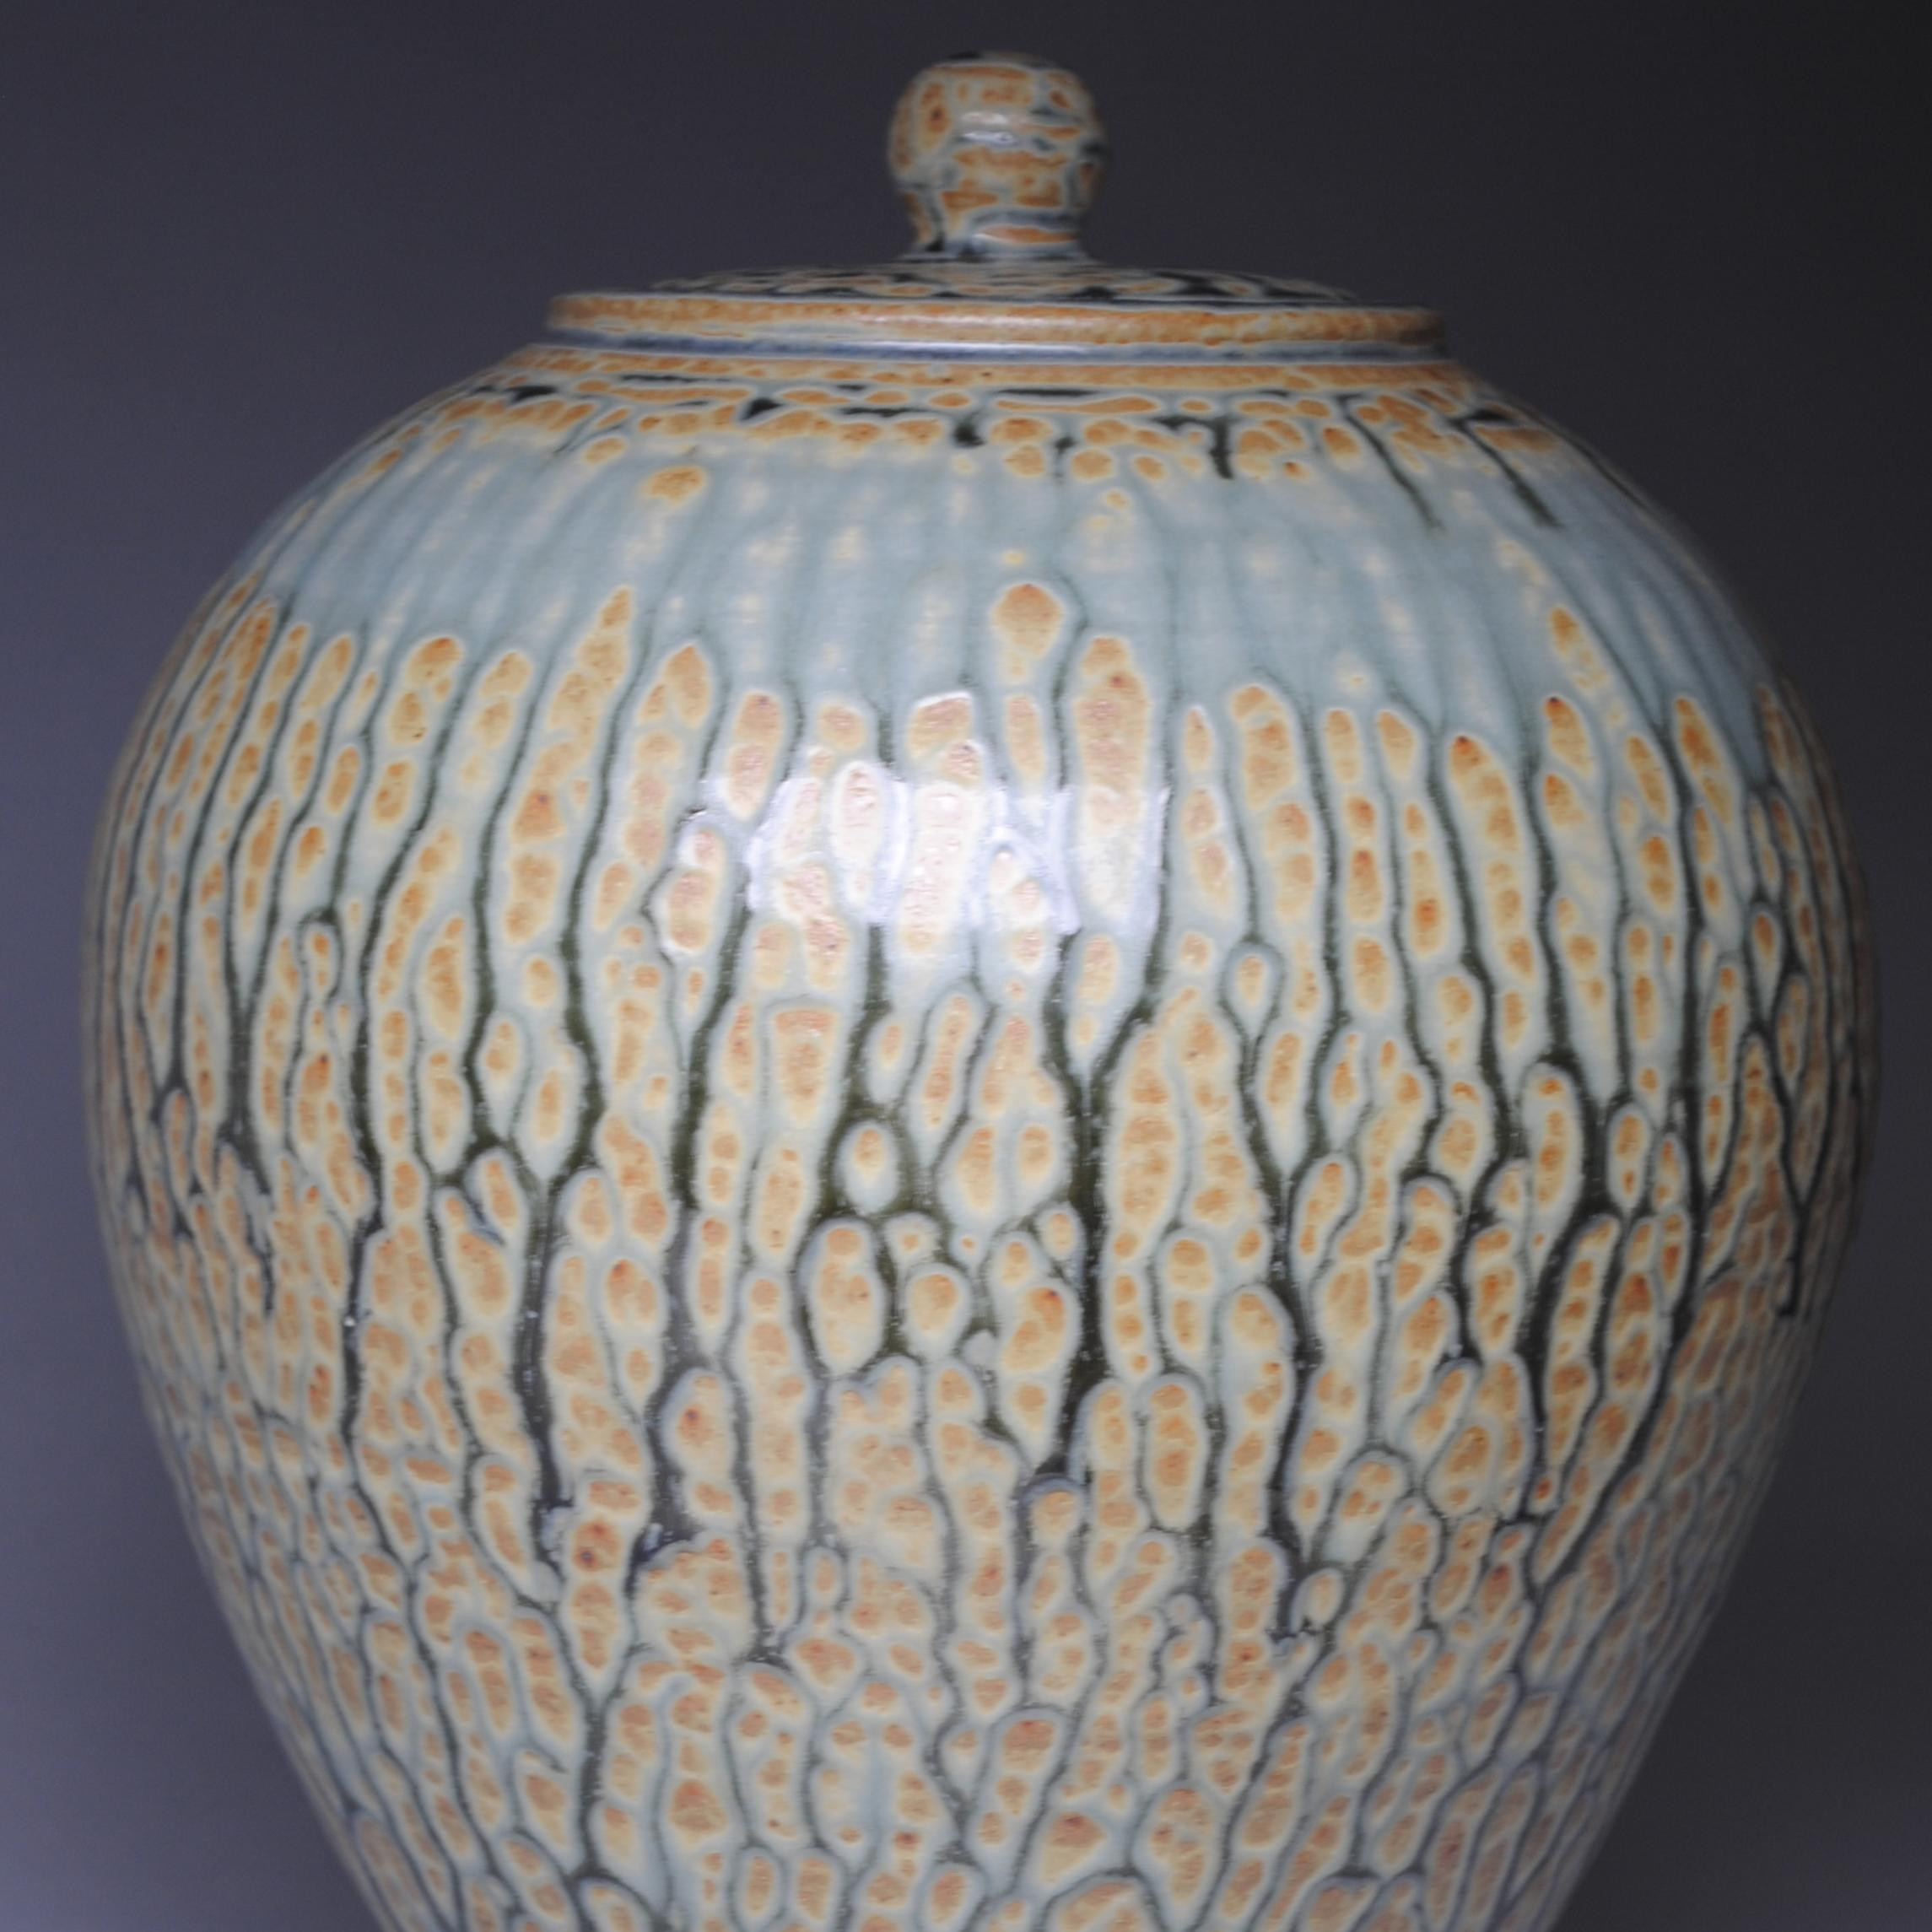 10 Stunning Mccoy Turquoise Vase 2024 free download mccoy turquoise vase of businesses art galleries datasphere with 1416405560 52006885 456134 john mccoy pottery logo